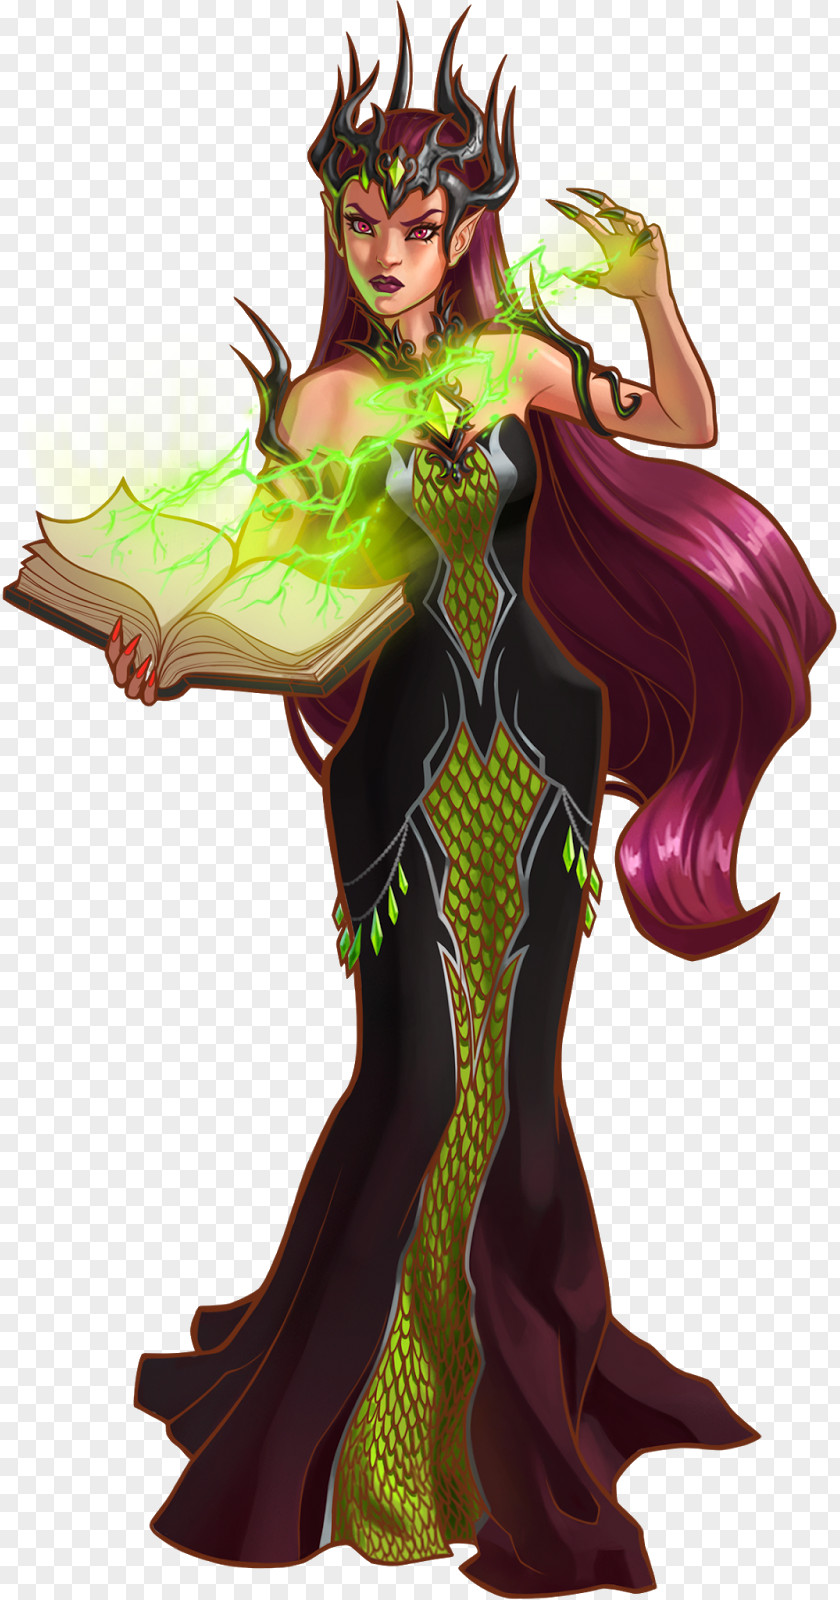 Golden Darkness Ragana Shadowflame Lego Elves The Group LEGO Friends PNG